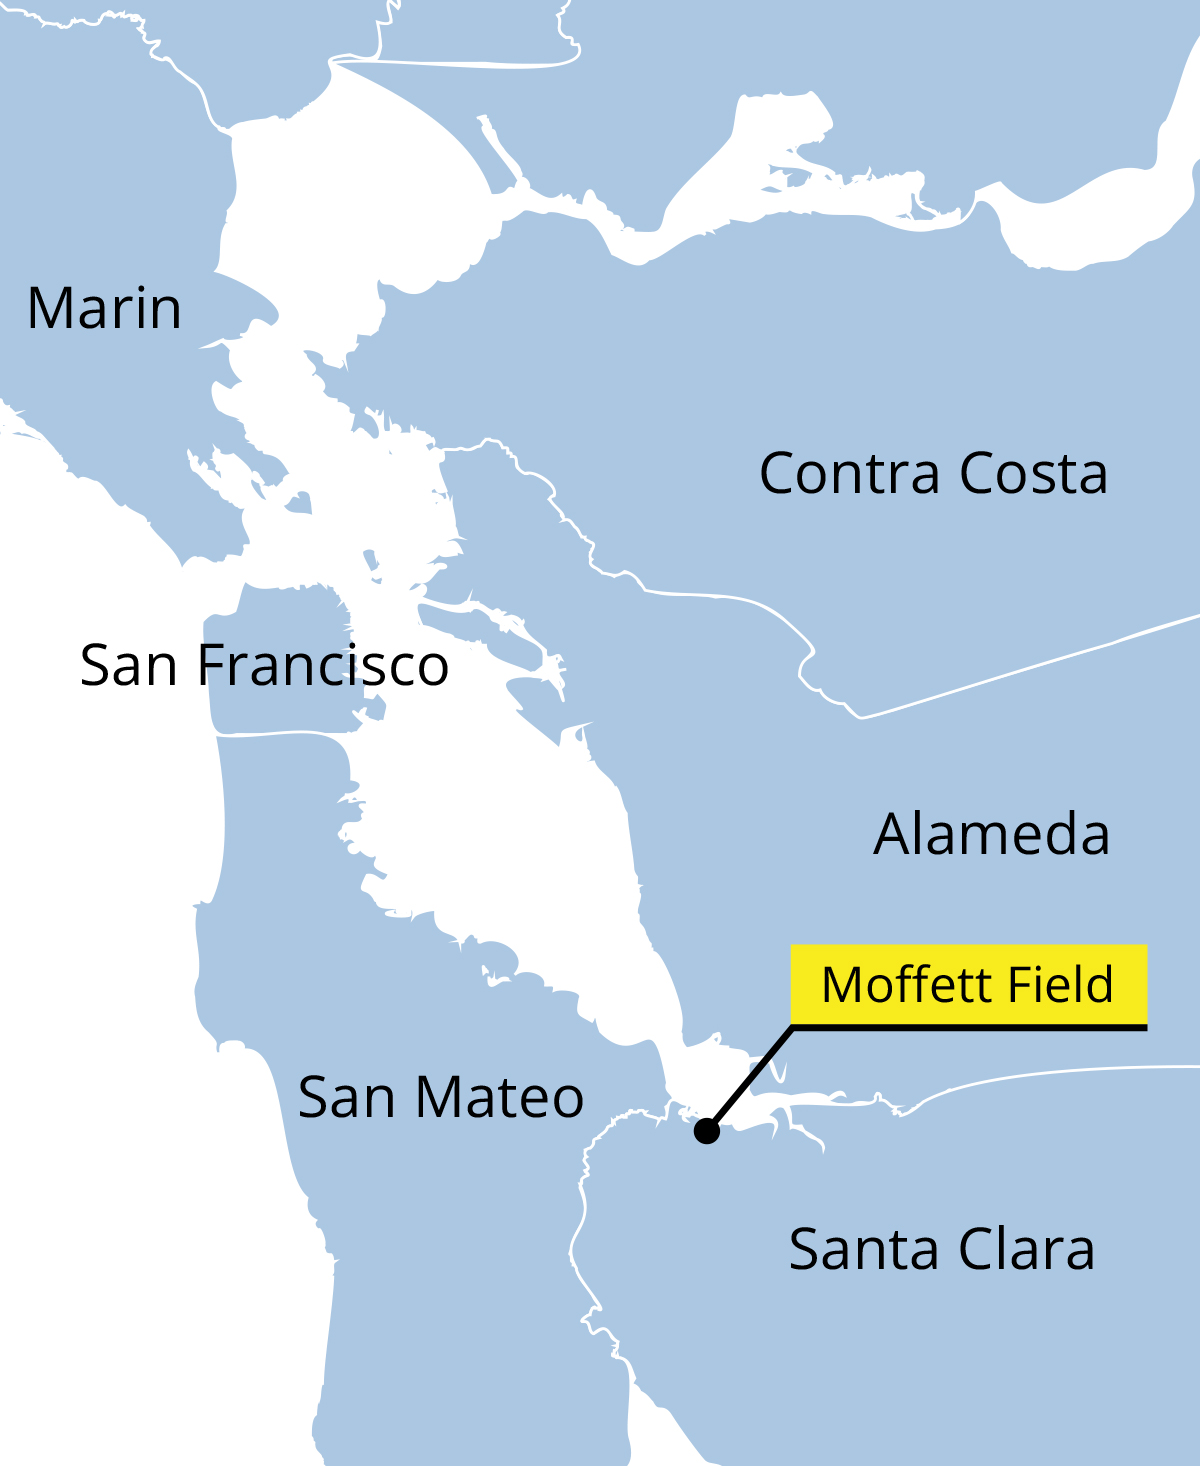 A map identifying the location of Moffett Field and the counties of Marin, San Francisco, San Mateo, Santa Clara, Alameda, and Contra Costa.